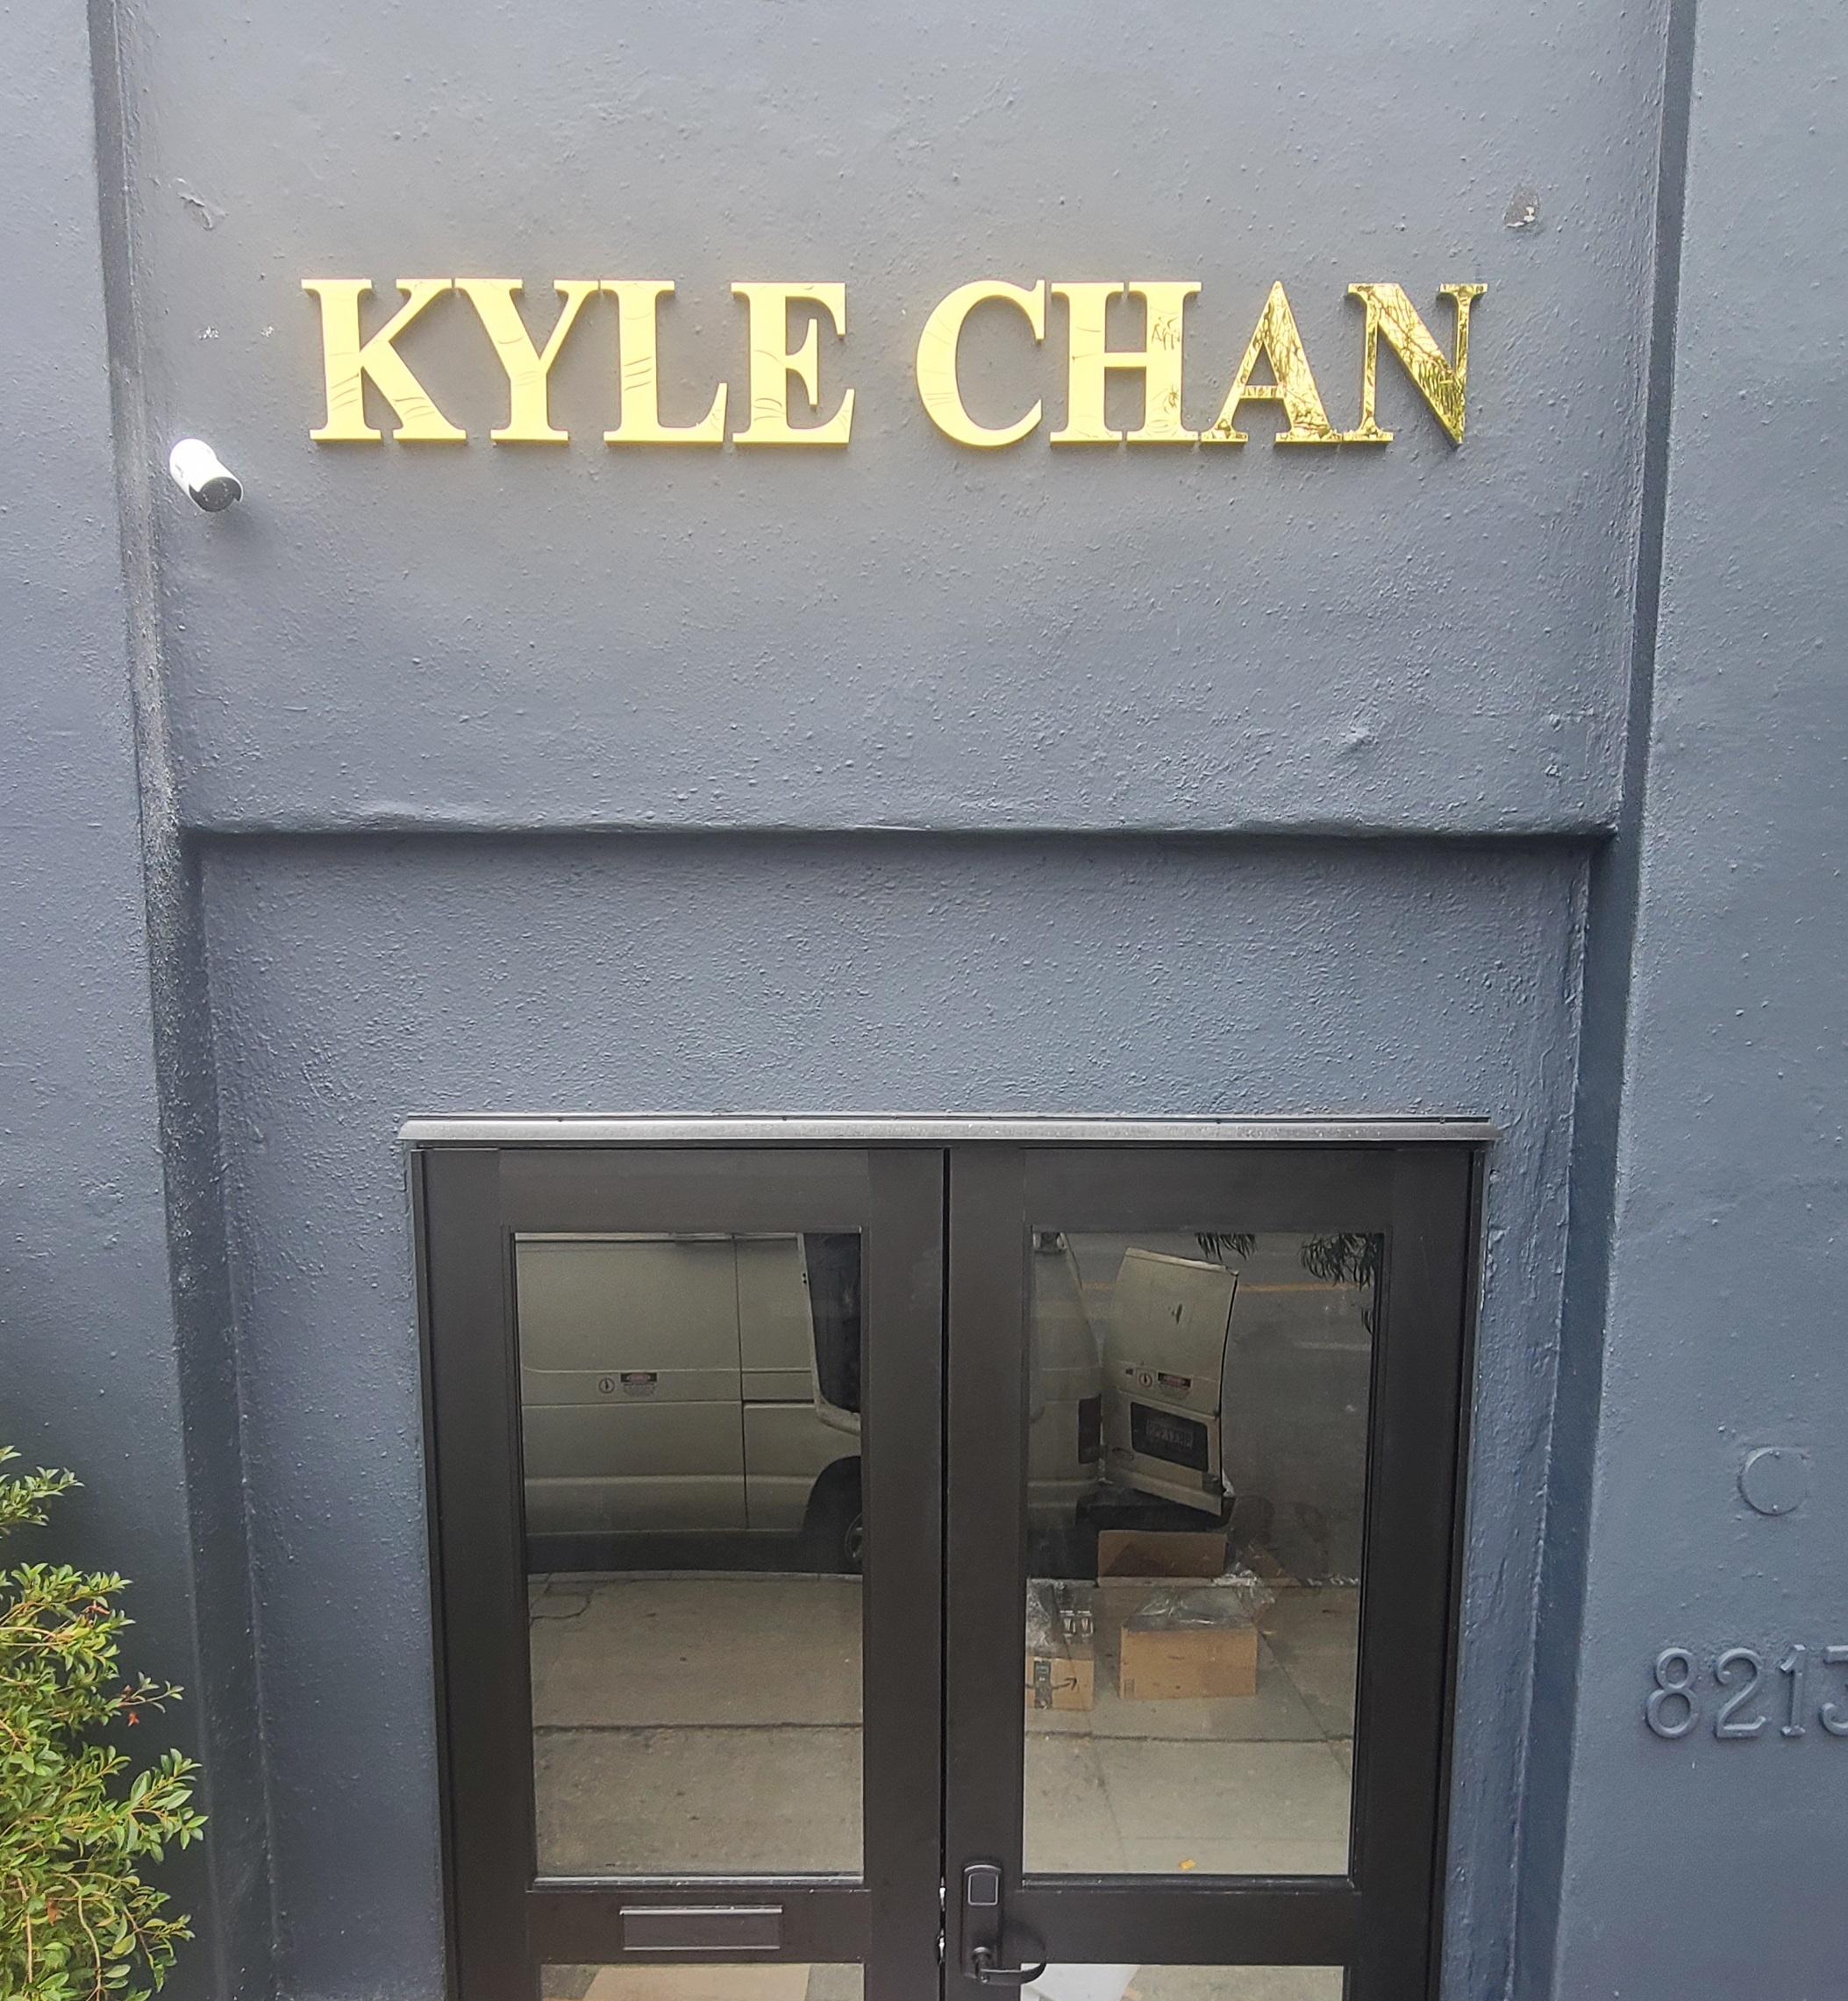 Dimensional letters for Kyle Chan, boutique storefront sign for their West Hollywood branch that is certainly visually stunning.